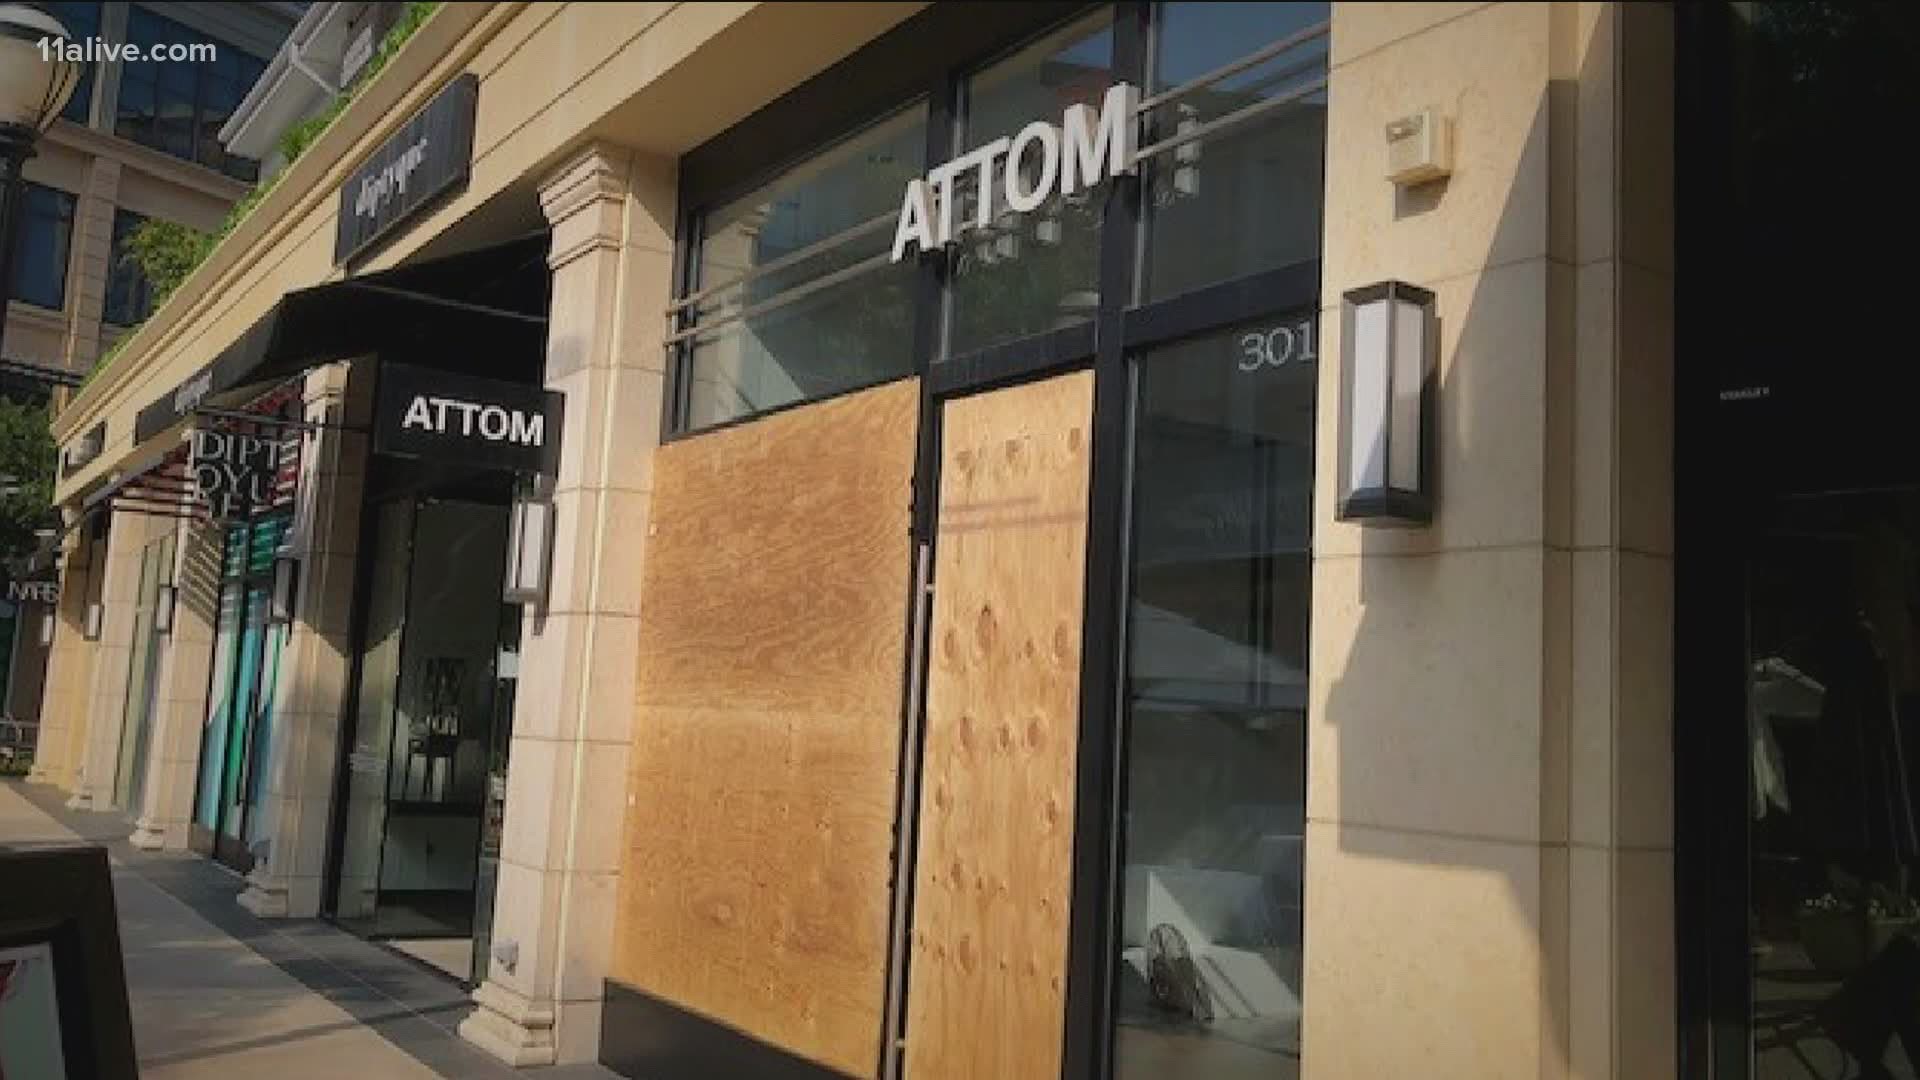 Zola Dias is in the U.S. on an investor's visa, but his investment - Attom clothing store in Atlanta - was devastated last Friday.